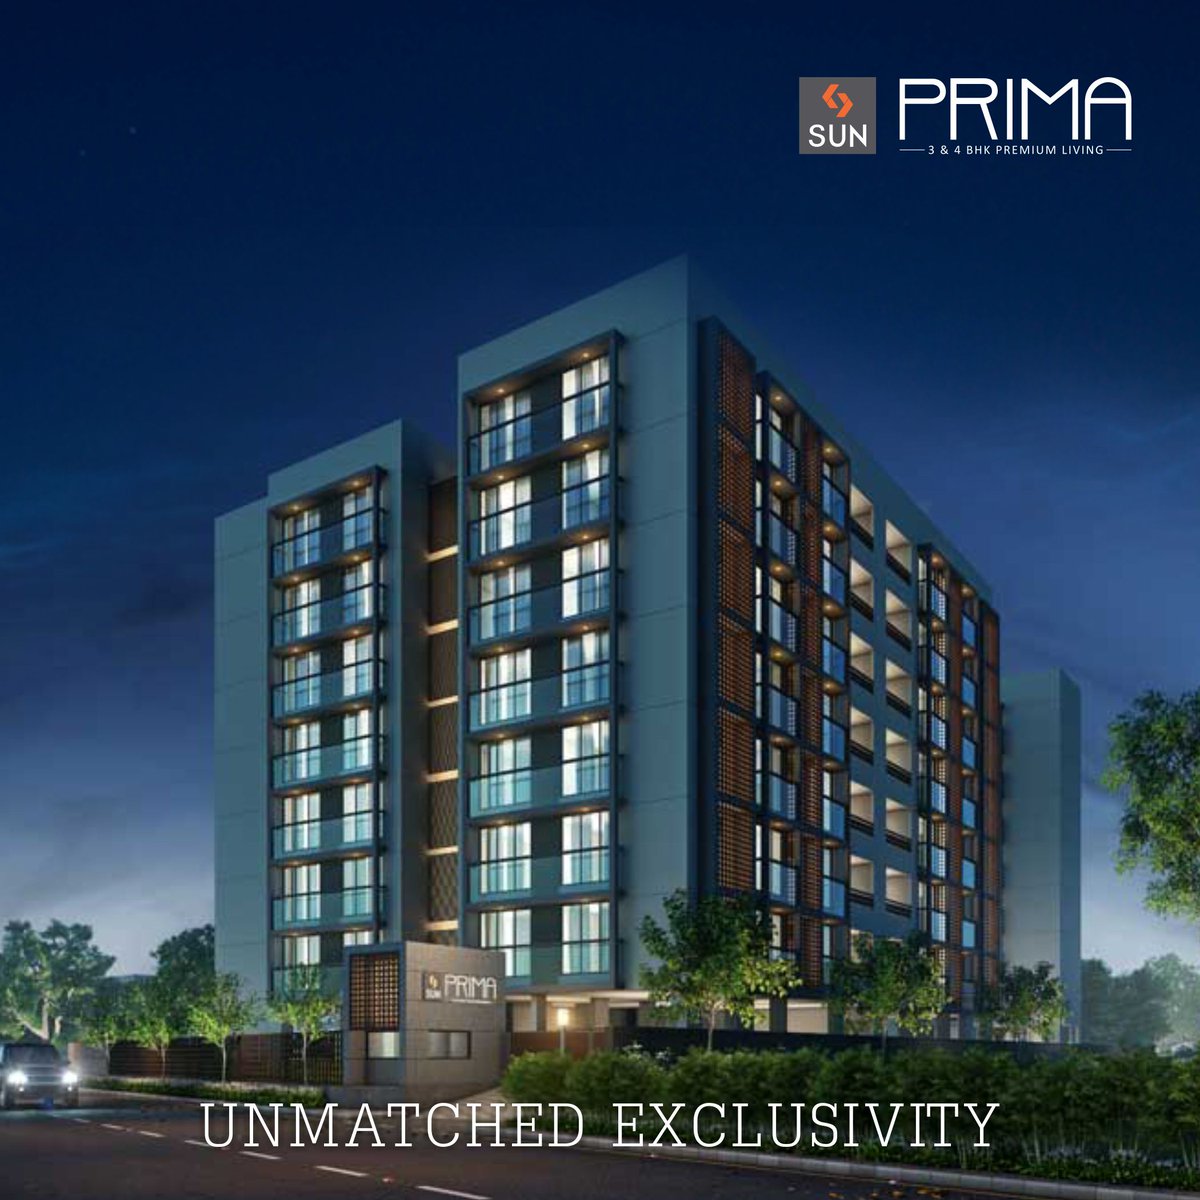 Sun Prima gives you a truly premium lifestyle to live.
Book your home today at, https://t.co/KbKeZNNPa5 https://t.co/ssz6SMB7nj